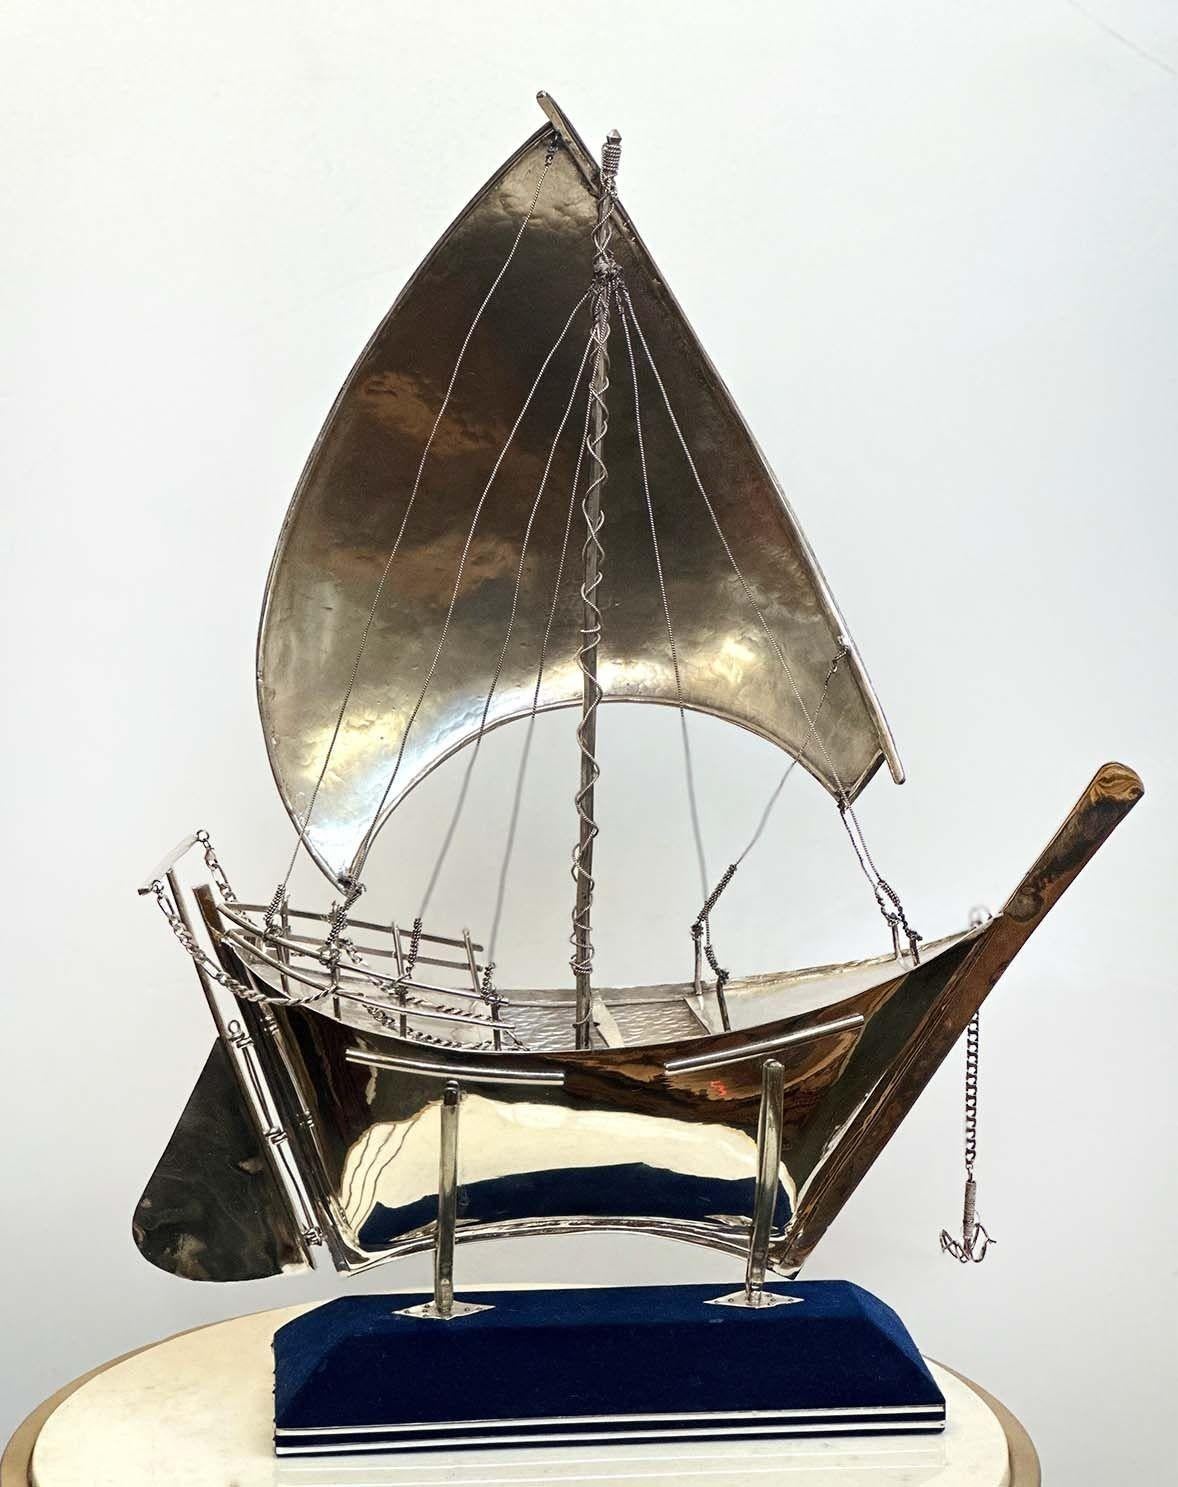 Rare 925 sterling silver boat sculpture on a lined blue velvet stand. Great detail all around making this an important piece. 
Dimensions:
24